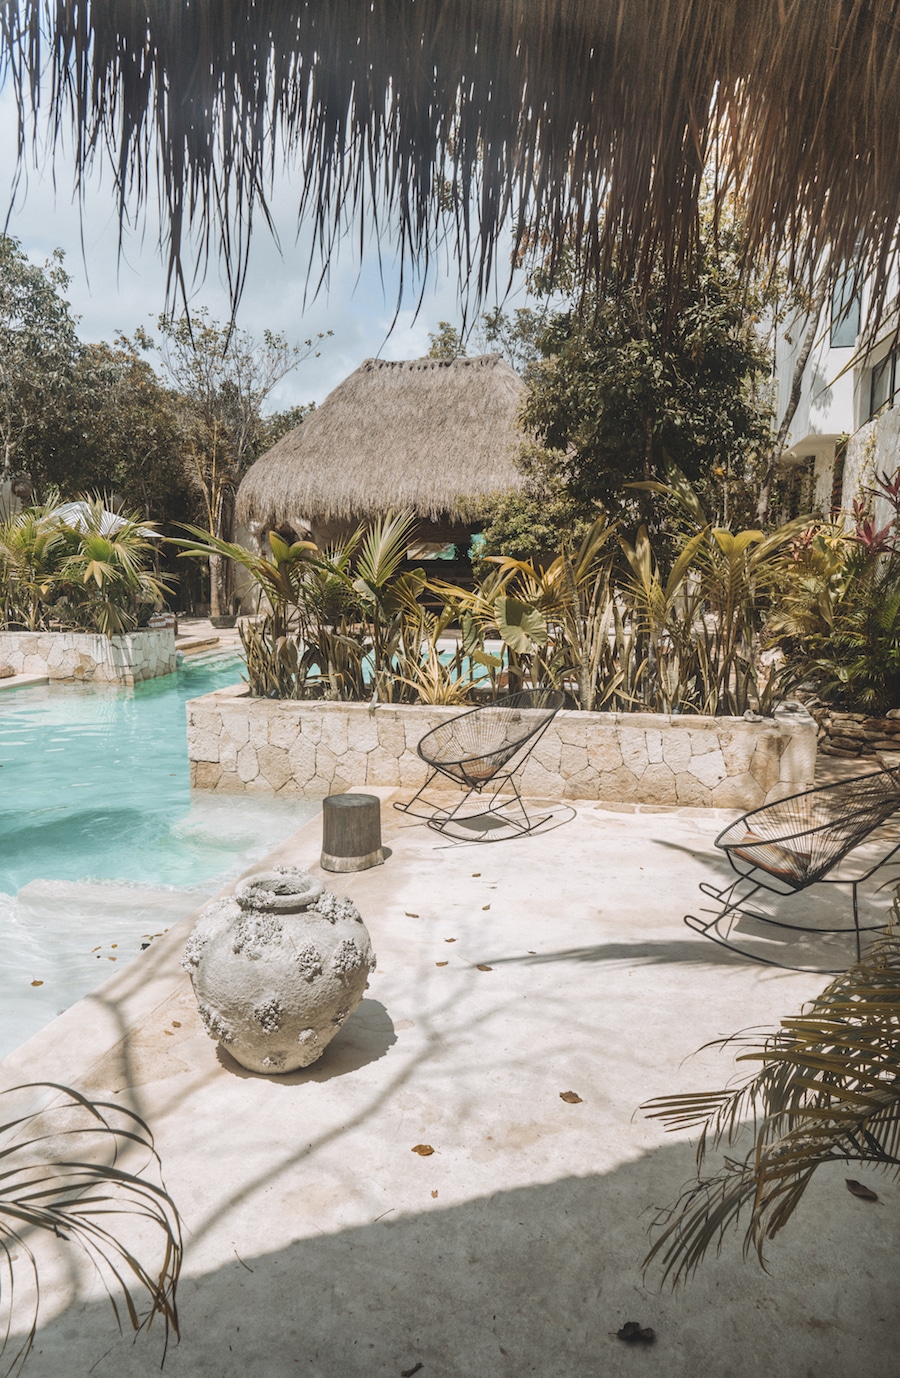 A Complete Guide To Tulum: Mexico's Most Stylish Beach Getaway